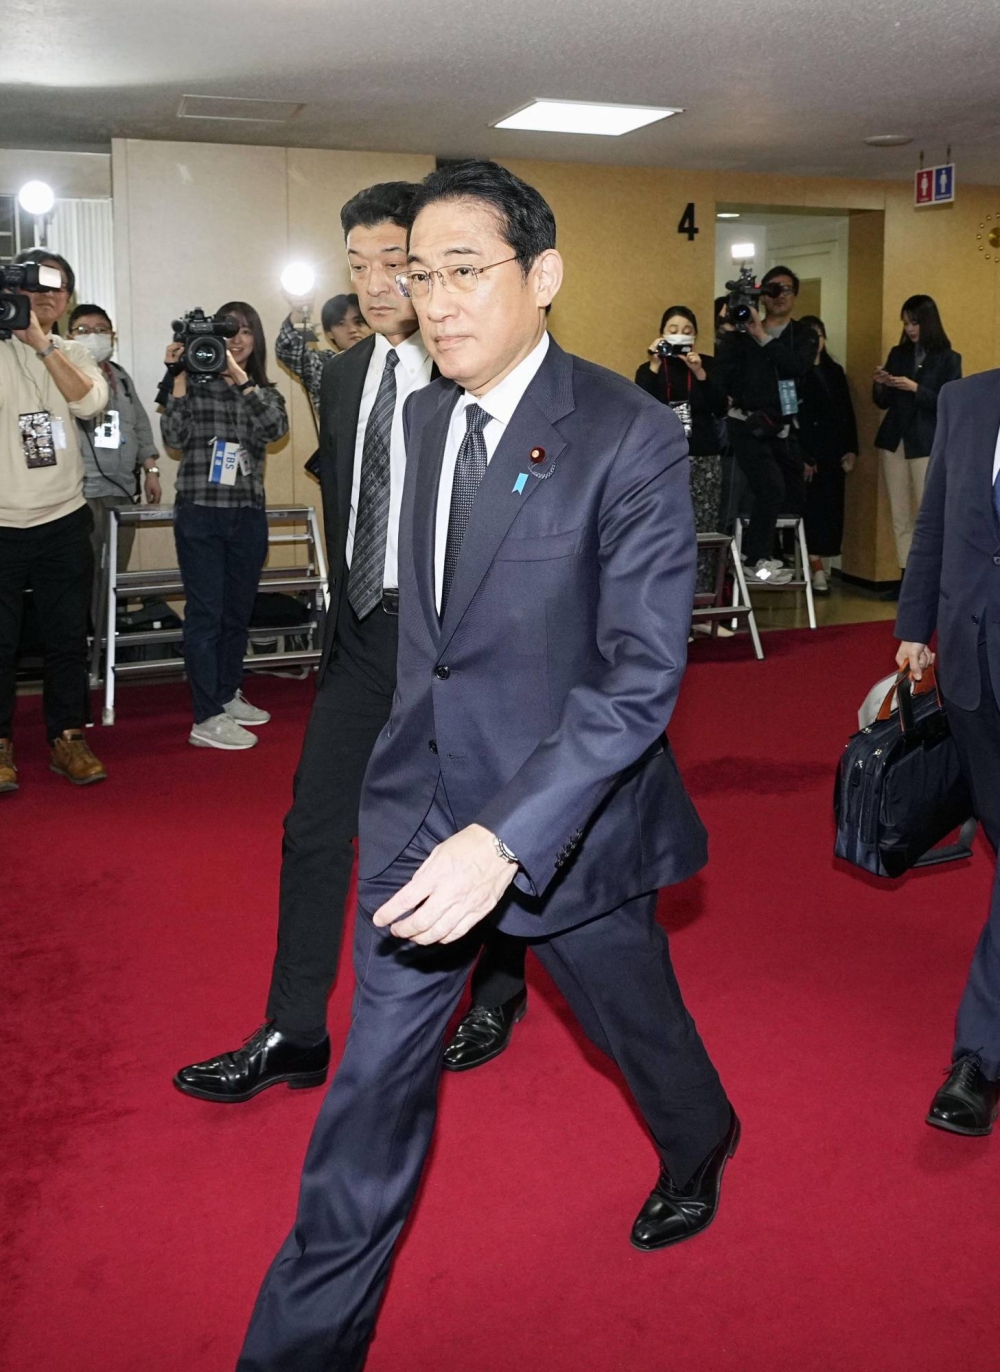 Kishida arrives at the Liberal Democratic Party headquarters in Tokyo on Wednesday.